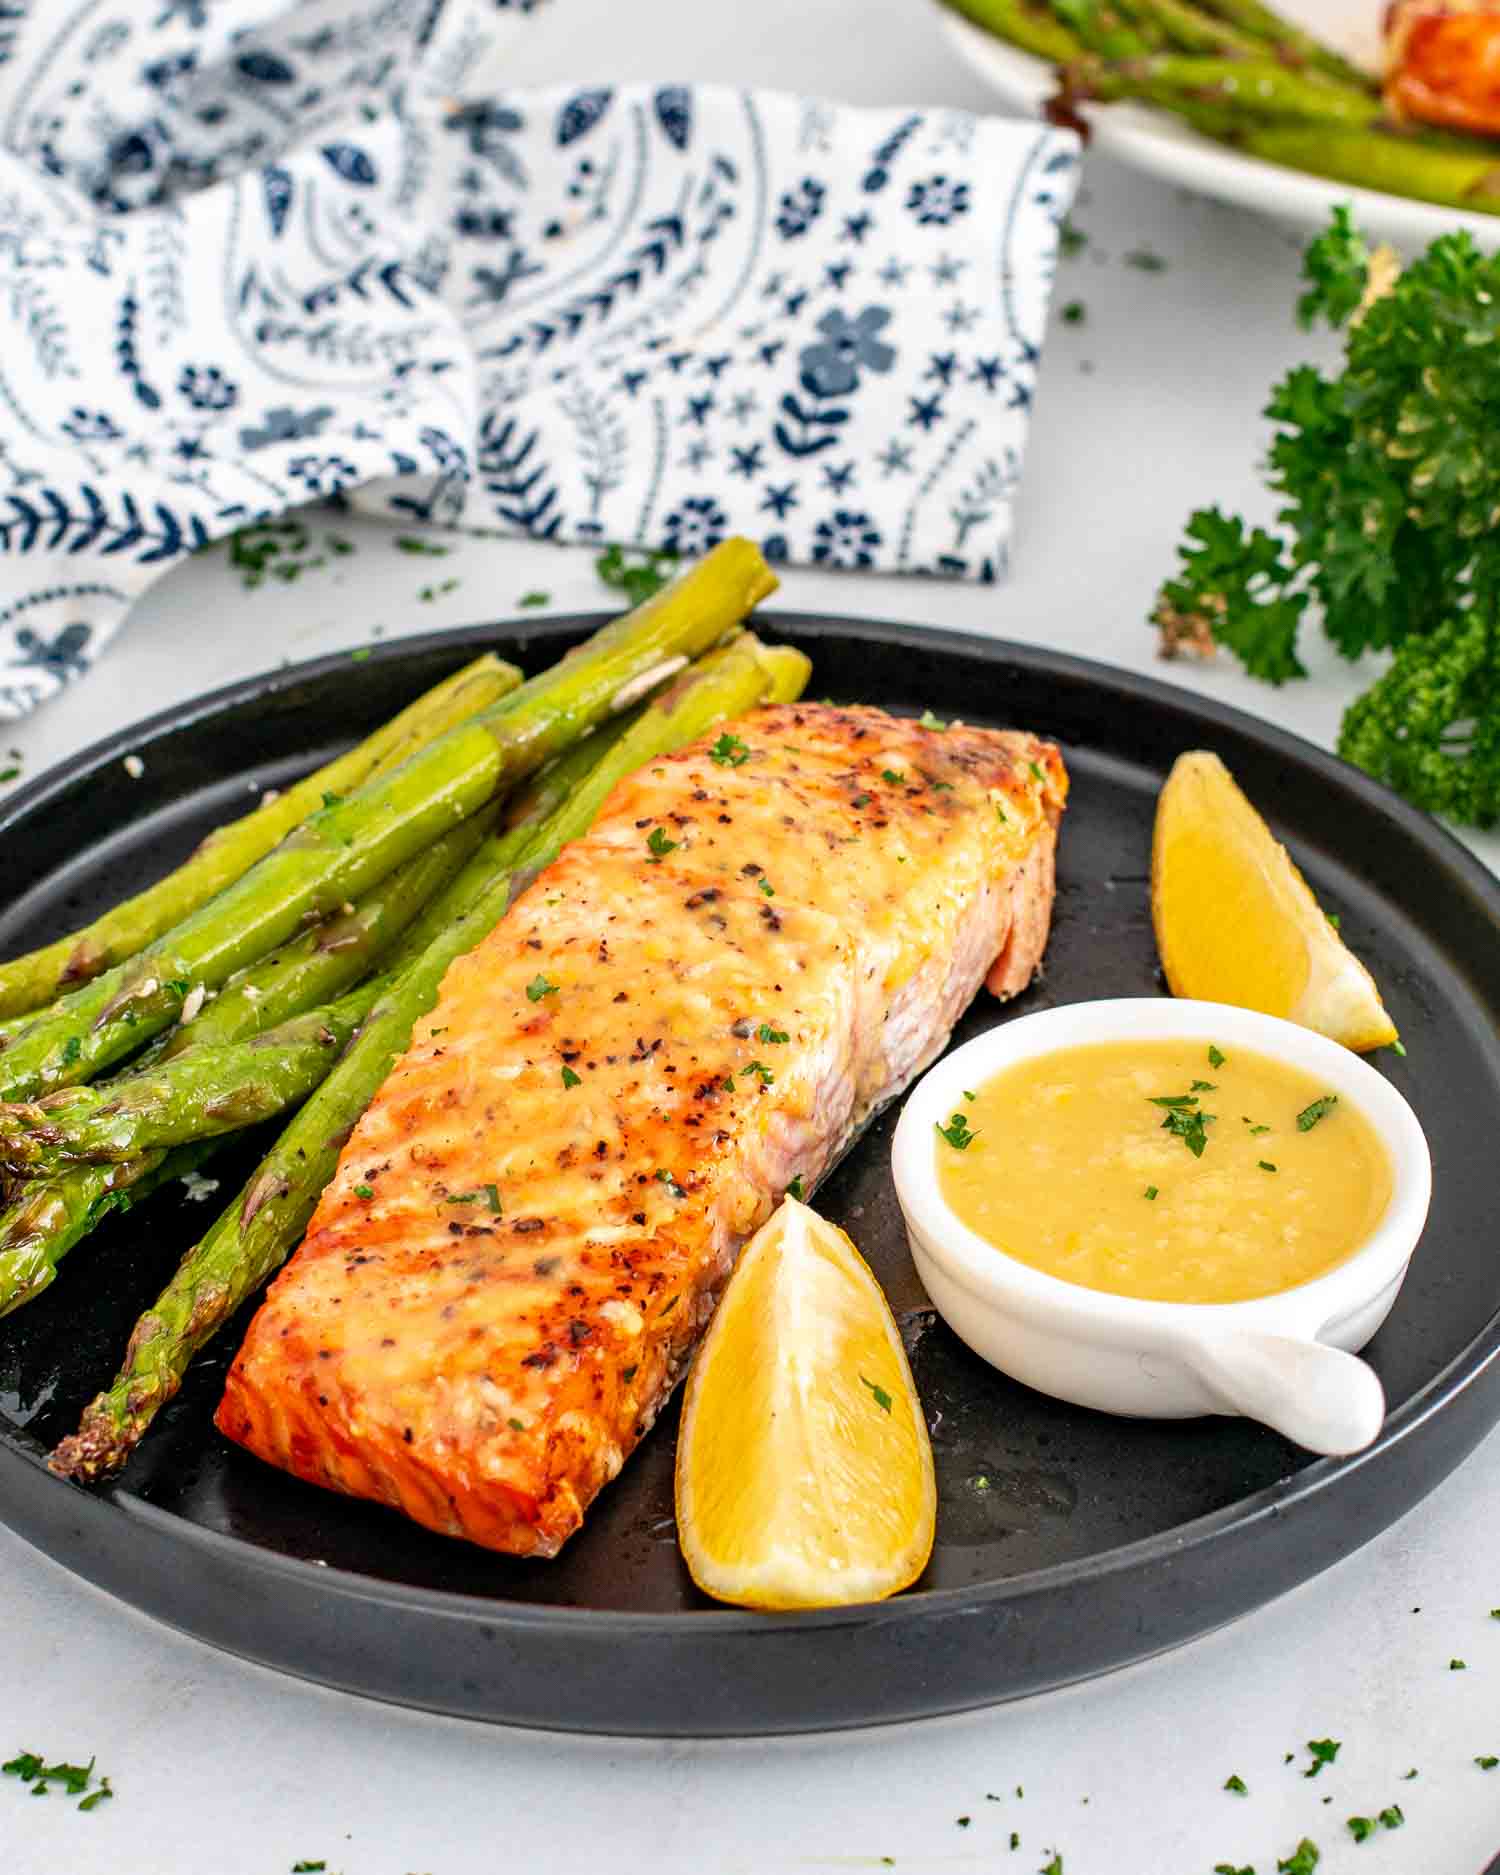 a serving of salmon and asparagus with a lemon sauce on the side.